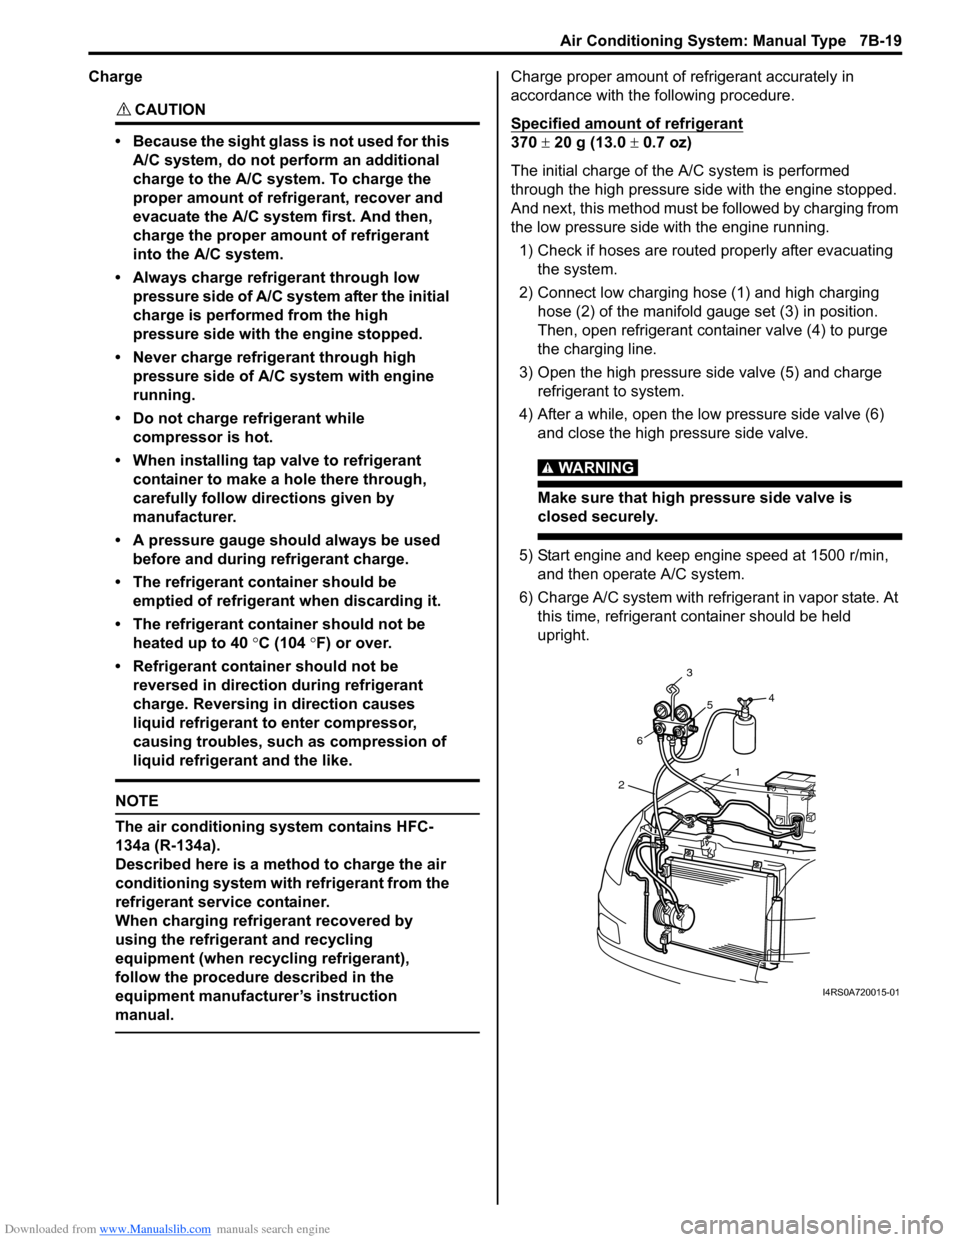 SUZUKI SWIFT 2007 2.G Service User Guide Downloaded from www.Manualslib.com manuals search engine Air Conditioning System: Manual Type 7B-19
Charge
CAUTION! 
• Because the sight glass is not used for this A/C system, do not perform an addi